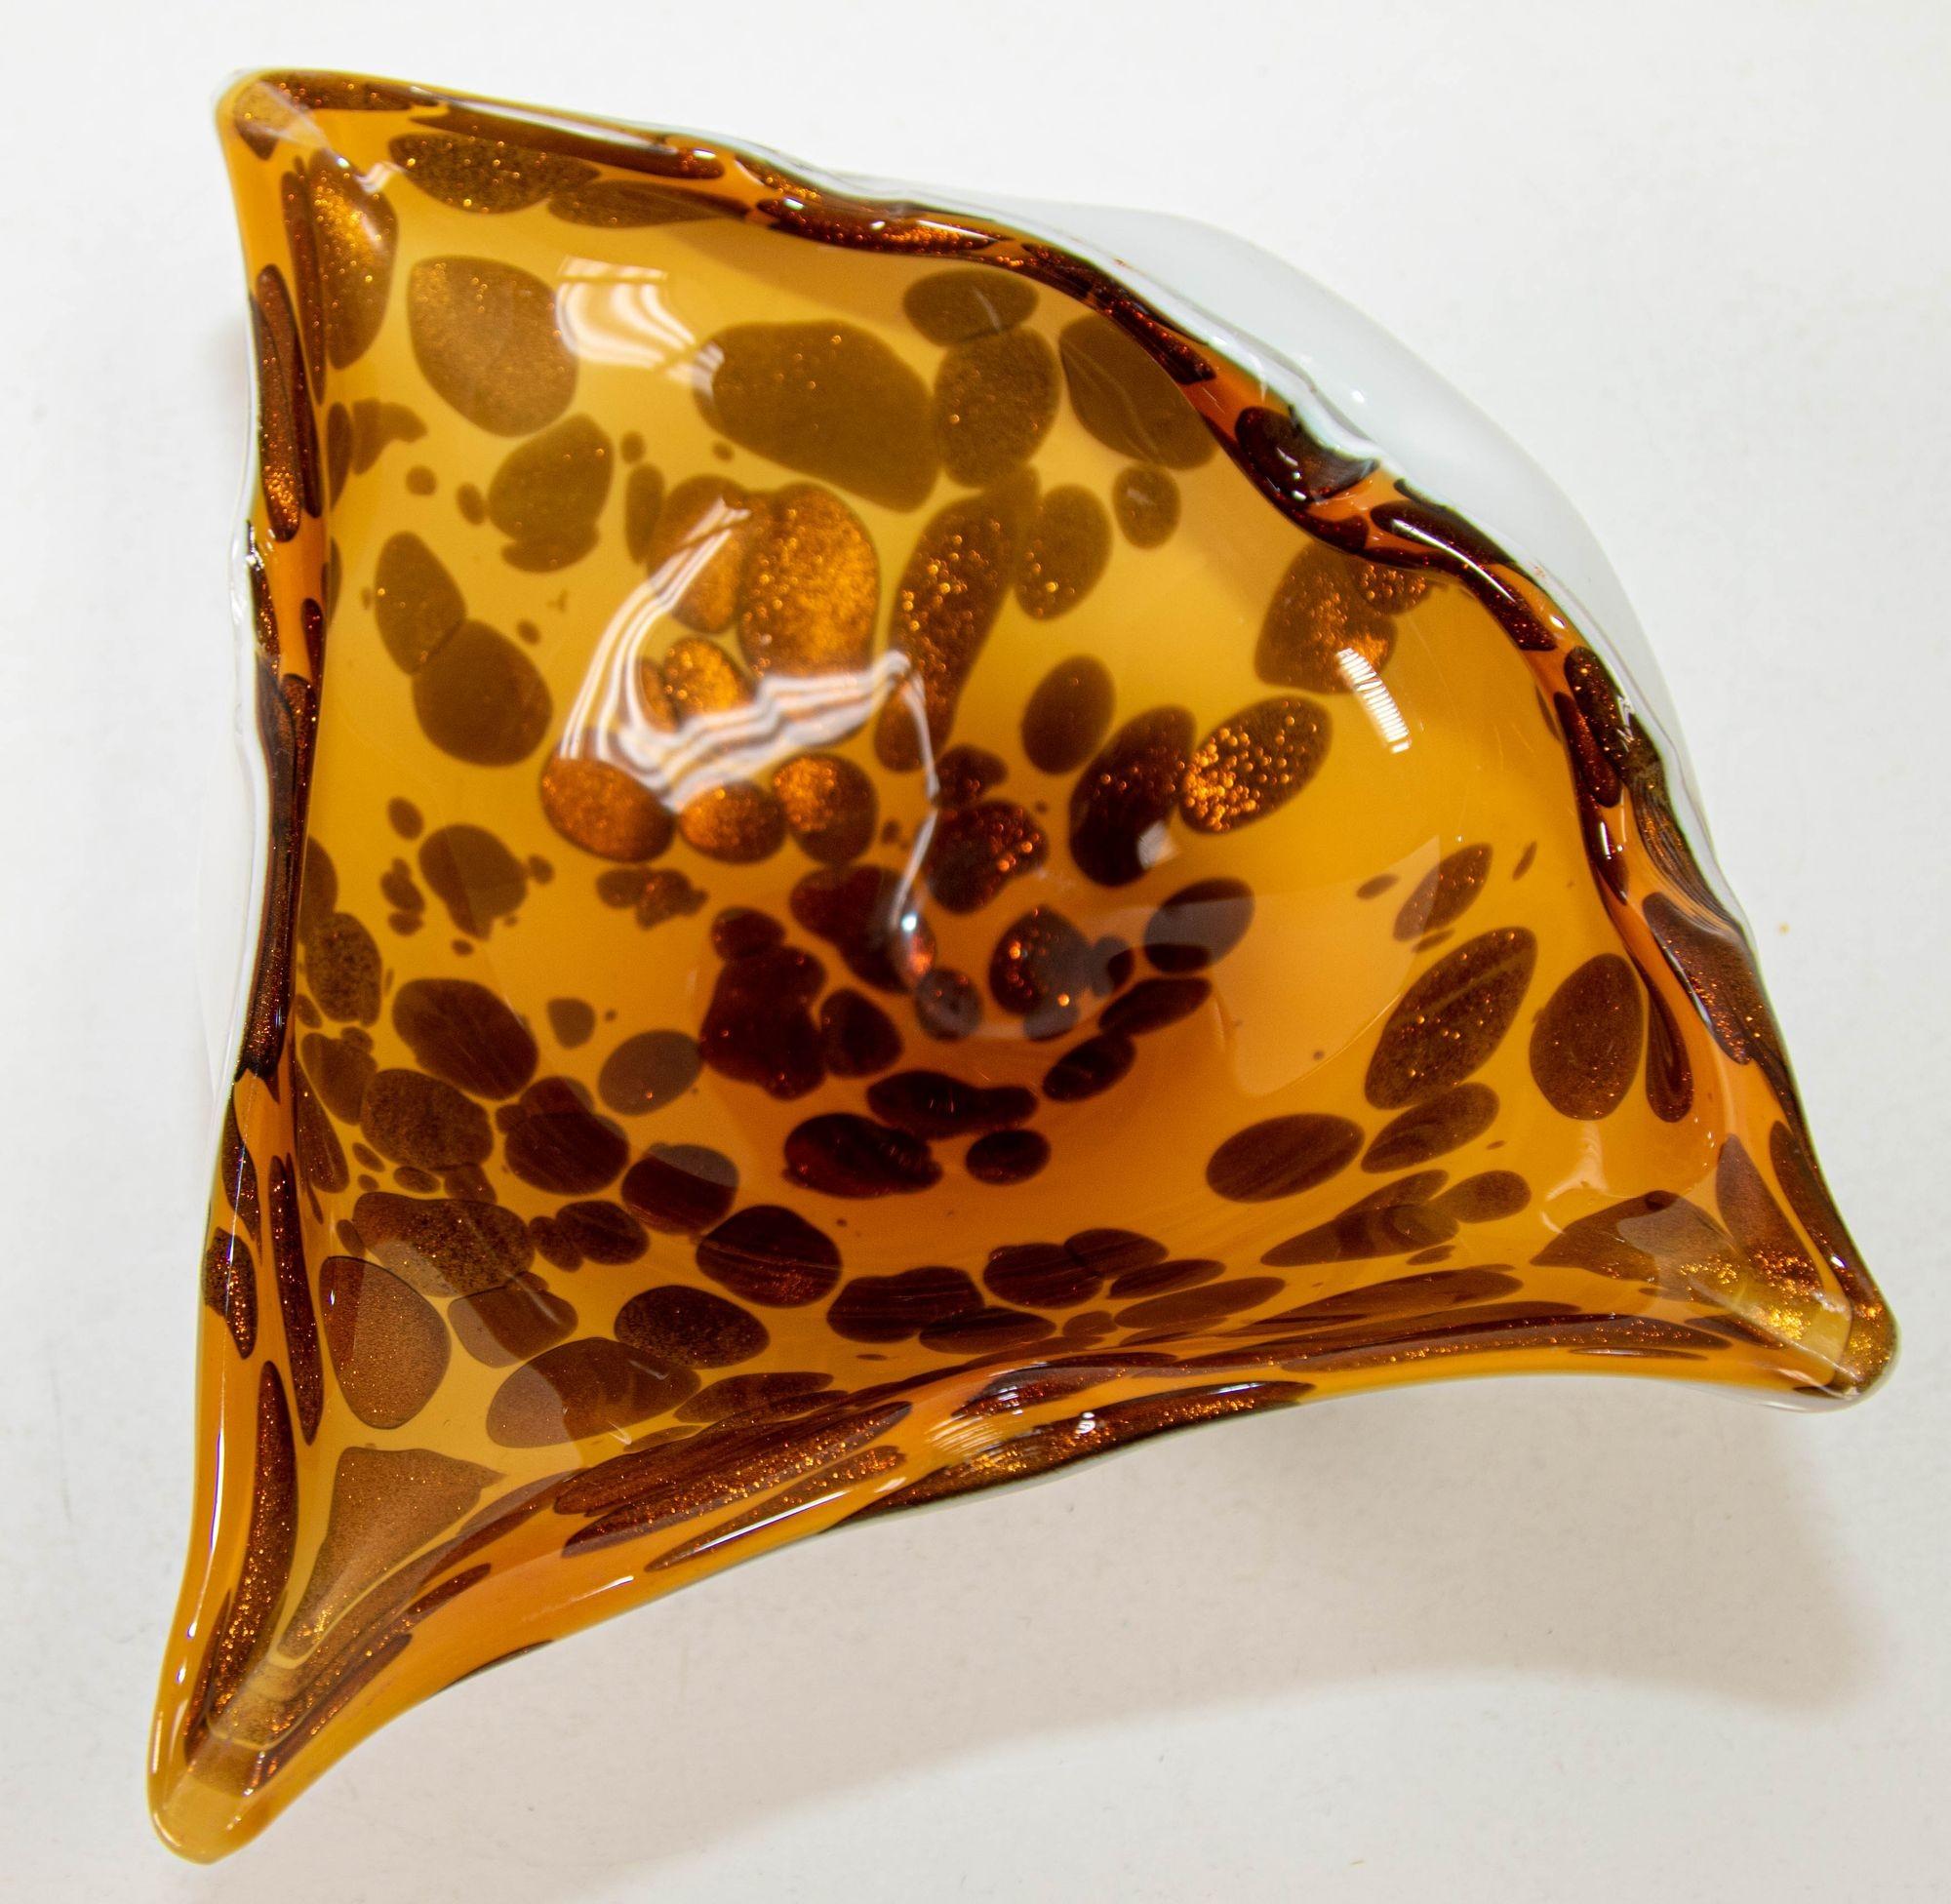 Murano Art Glass Manta Ray leopard, tortoise spotted bowl in amber and a dark espresso-brown colors and gold copper aventurine inclusions. Unique chic amber colored mottled hand blown copper and white Murano glass dish in Manta Ray shape
The bowl